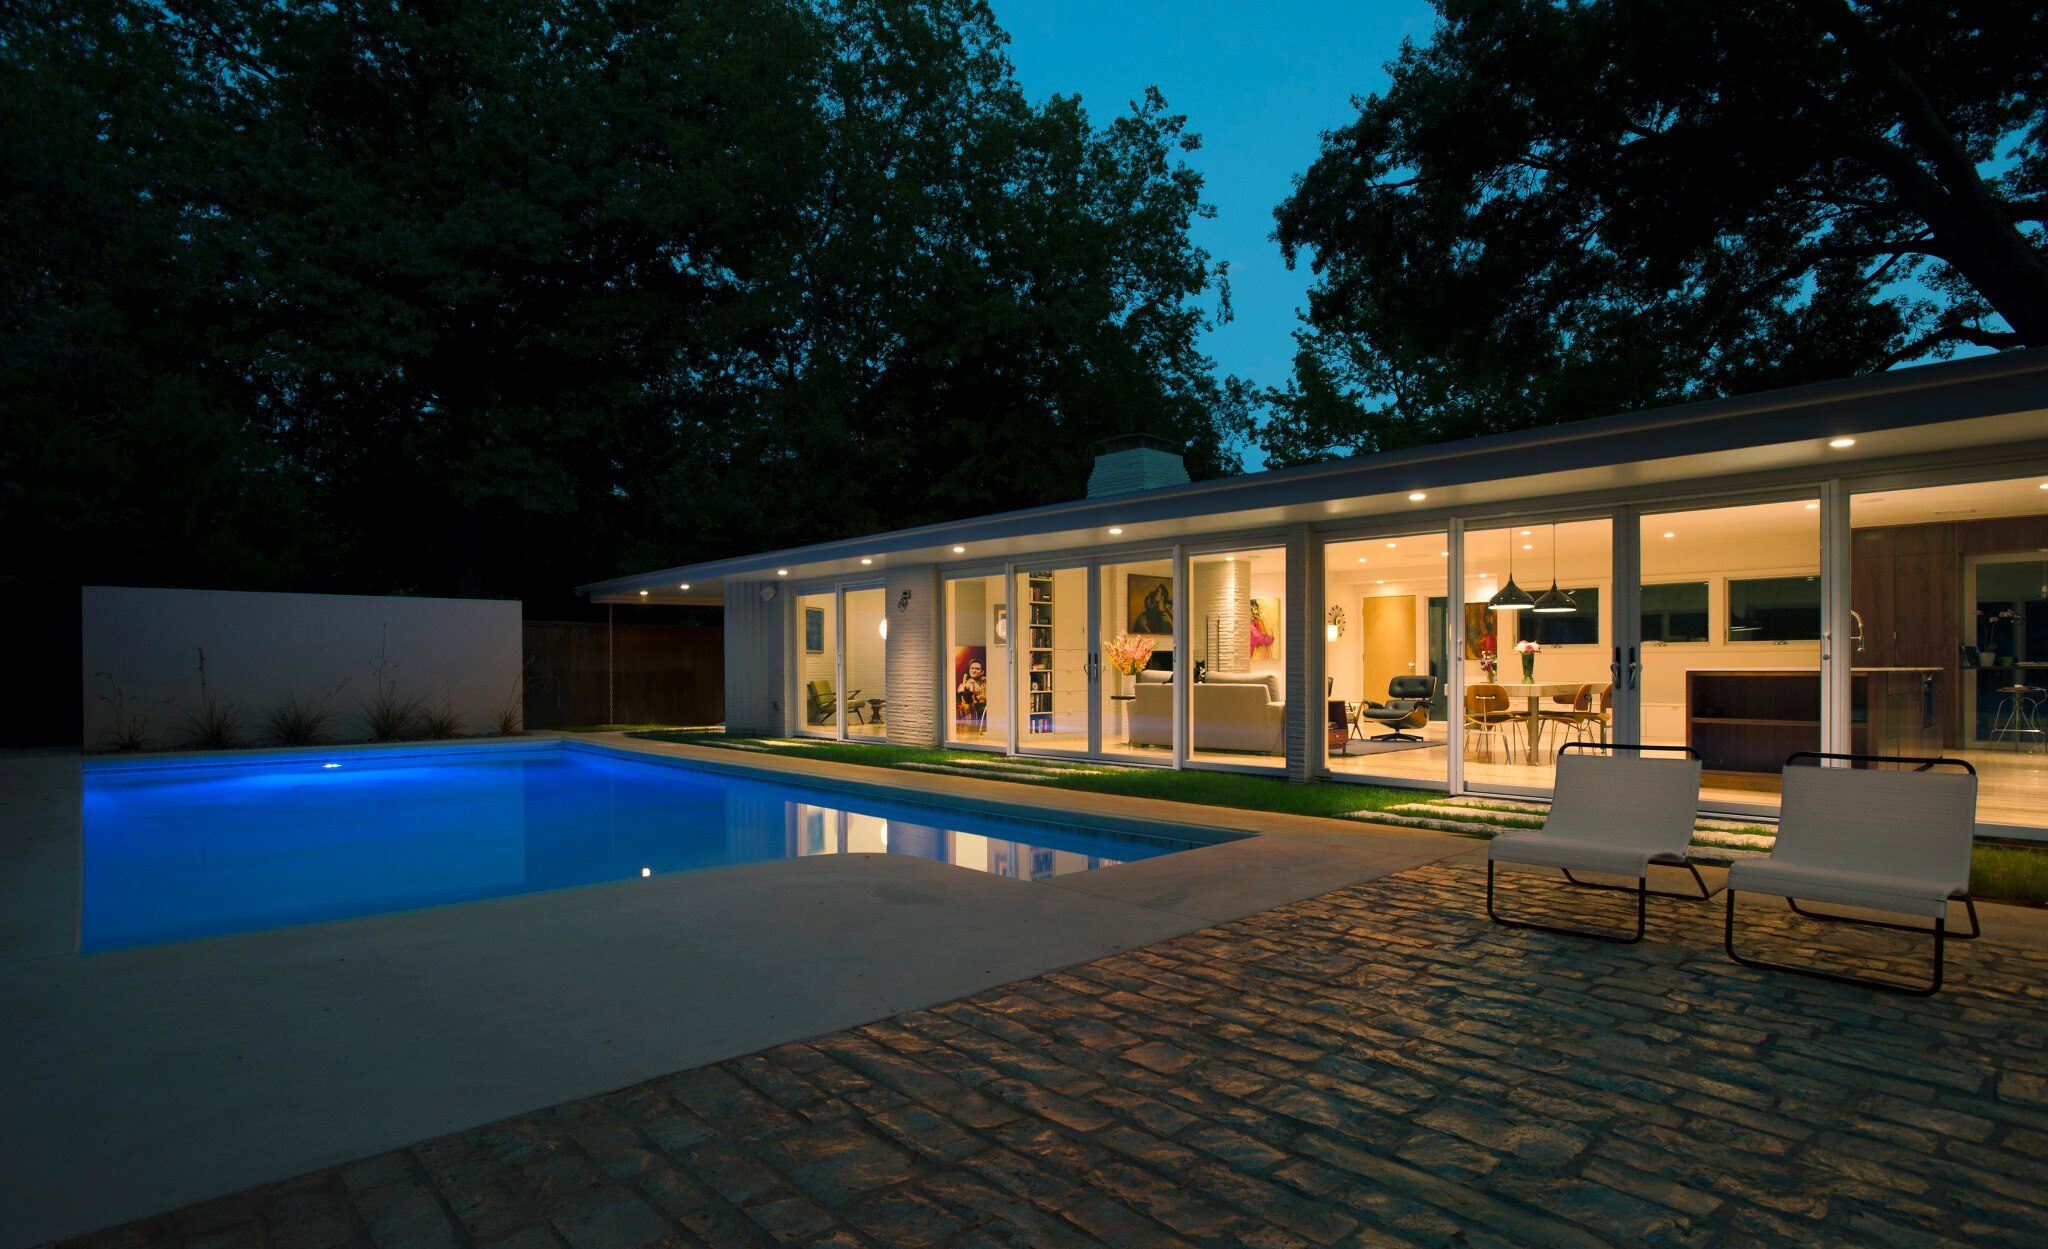 Mid-century modern home exterior. View of back yard and custom pool at night, with view into living spaces through walls of windows. Home renovation by Brent Swift and SwiftCo in Norman, Oklahoma. Purpose is to show our quality of work.